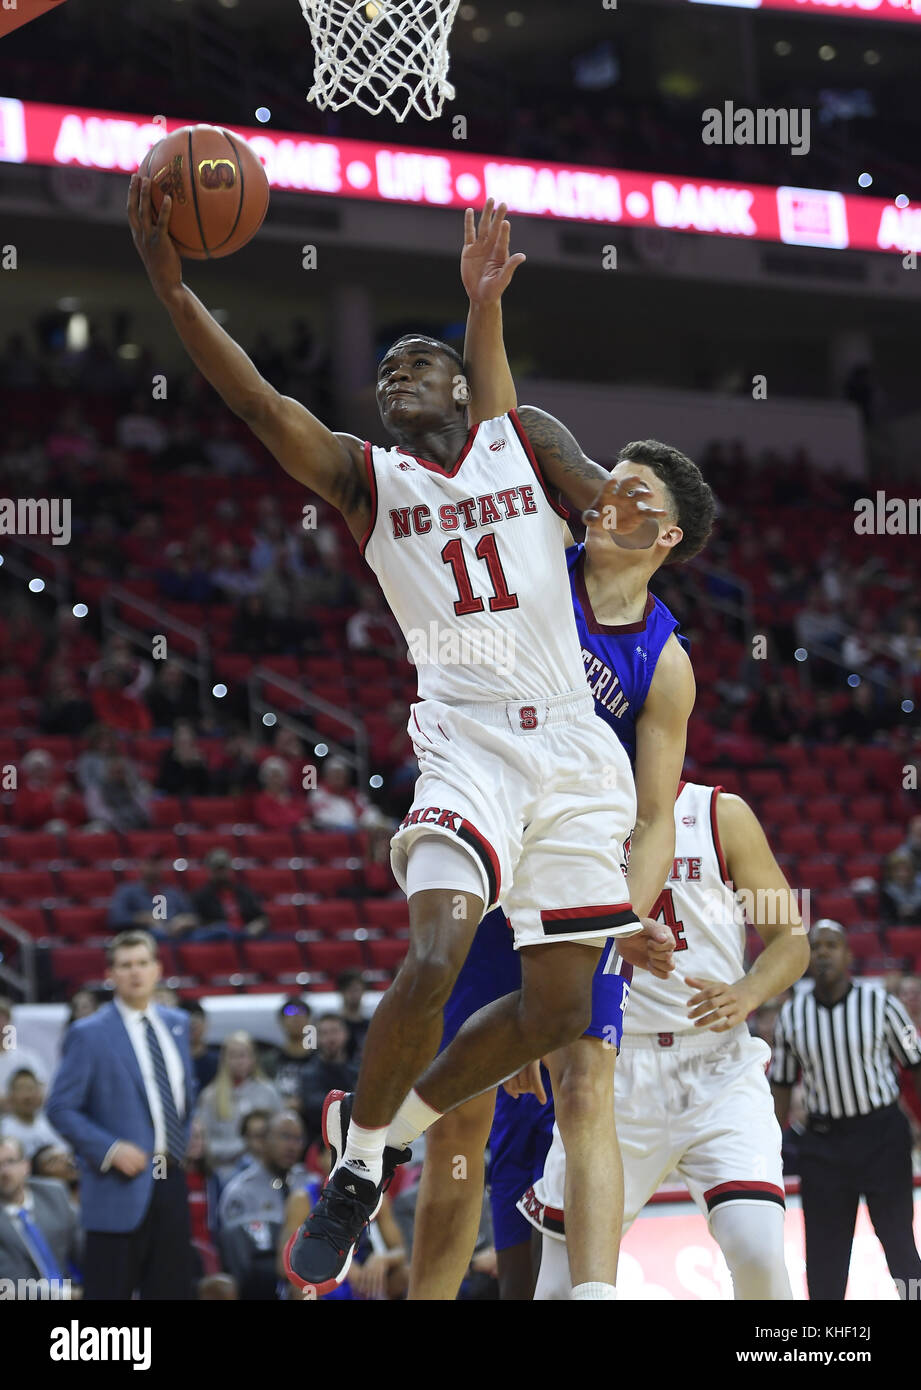 Raleigh, North Carolina, USA. 16th Nov, 2017. MARKELL JOHNSON (11) of North Carolina State scores with a layup against RUBEN ARROYO, right, of Presbyterian. The North Carolina State University Wolfpack hosted the Presbyterian Blue Hose at the PNC Arena in Raleigh, N.C. Credit: Fabian Radulescu/ZUMA Wire/Alamy Live News Stock Photo